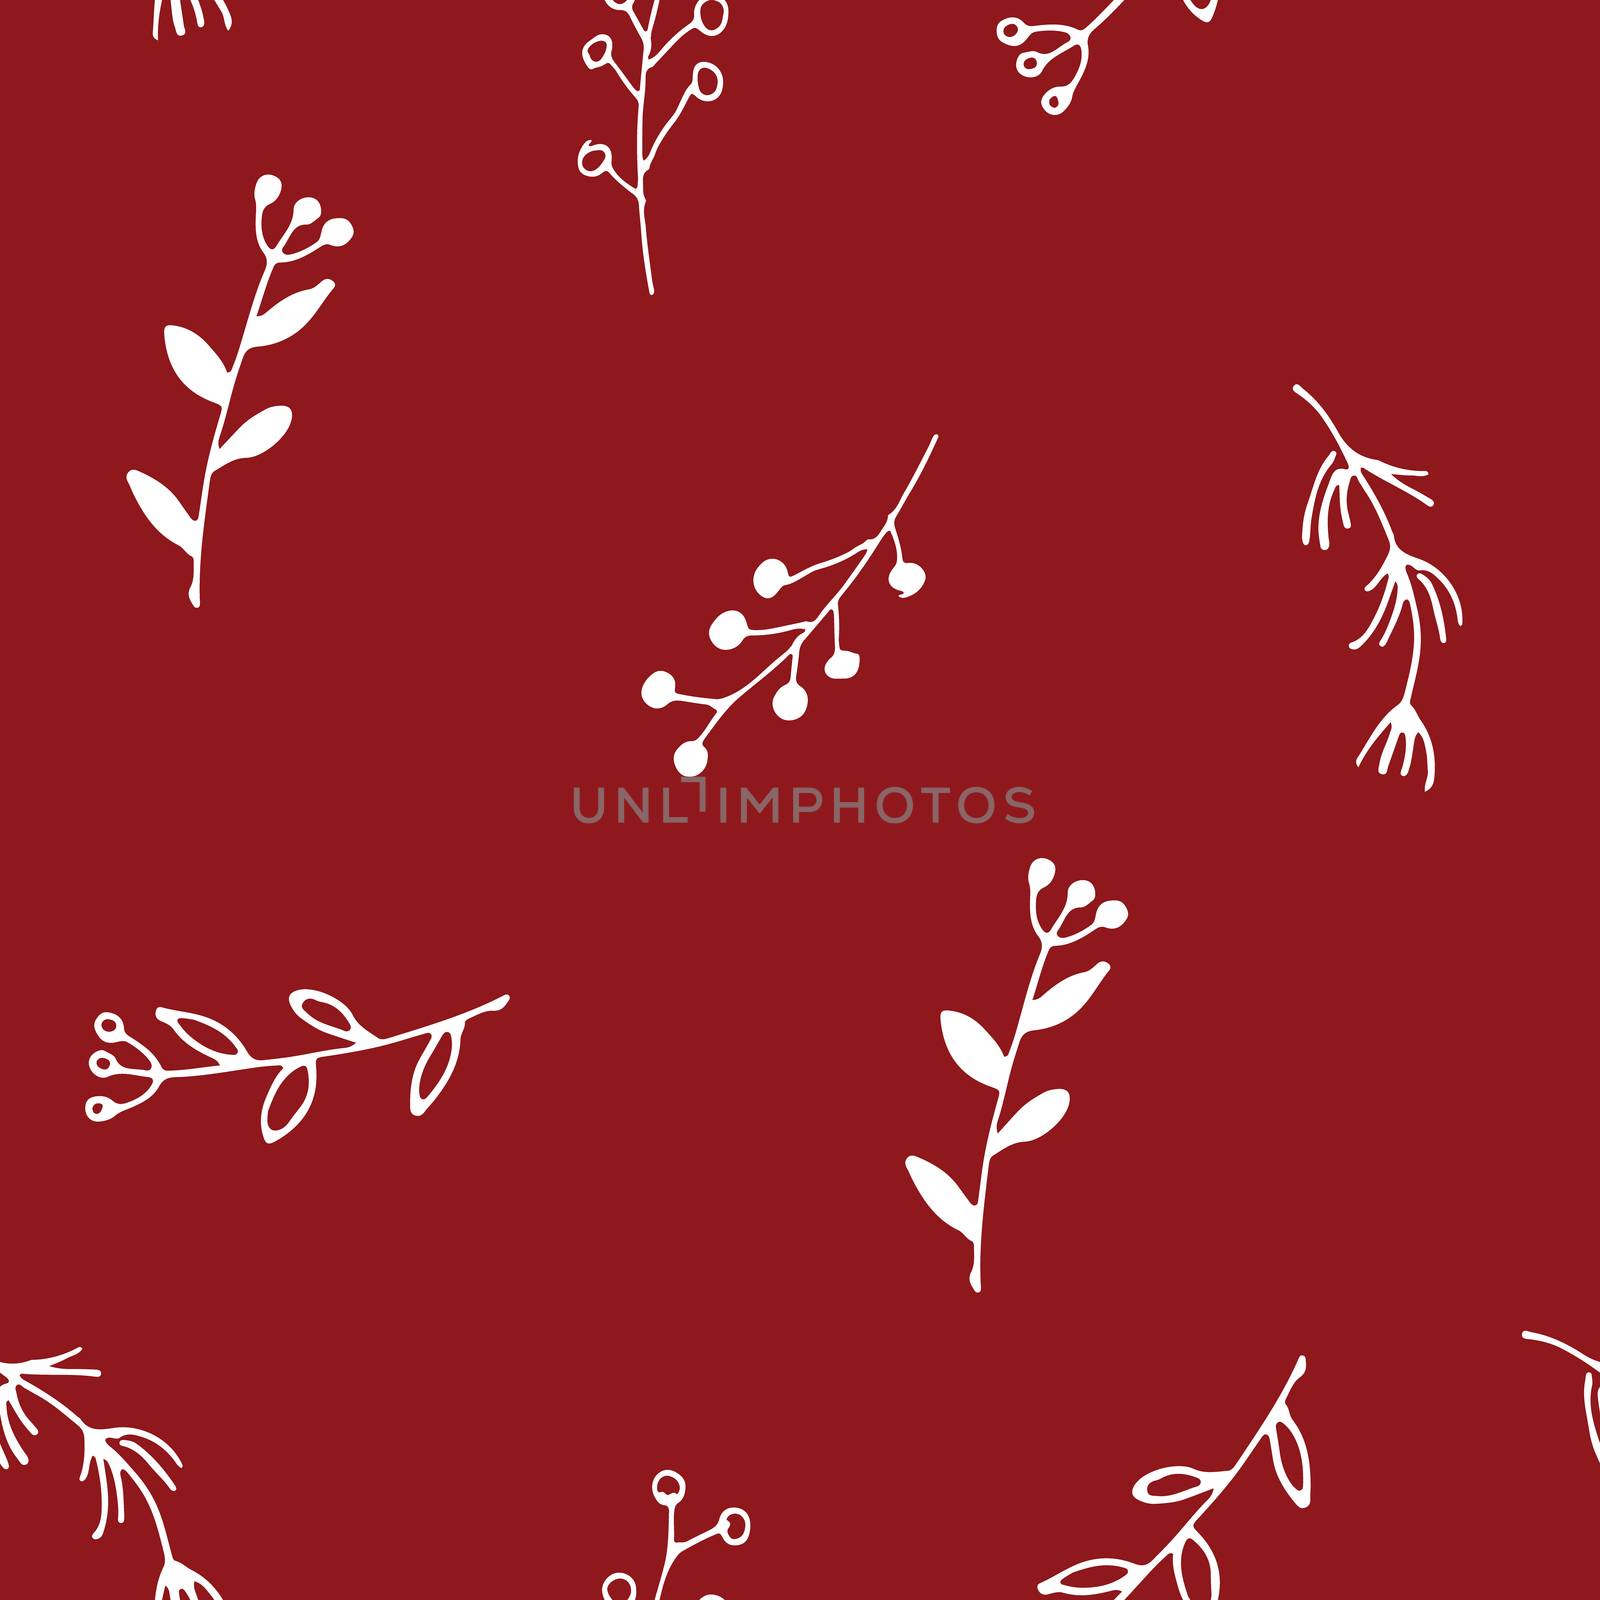 Branches hand drawn doodles Seamless Pattern, Christmas wreath decoration background. Vector illustration by Lemon_workshop